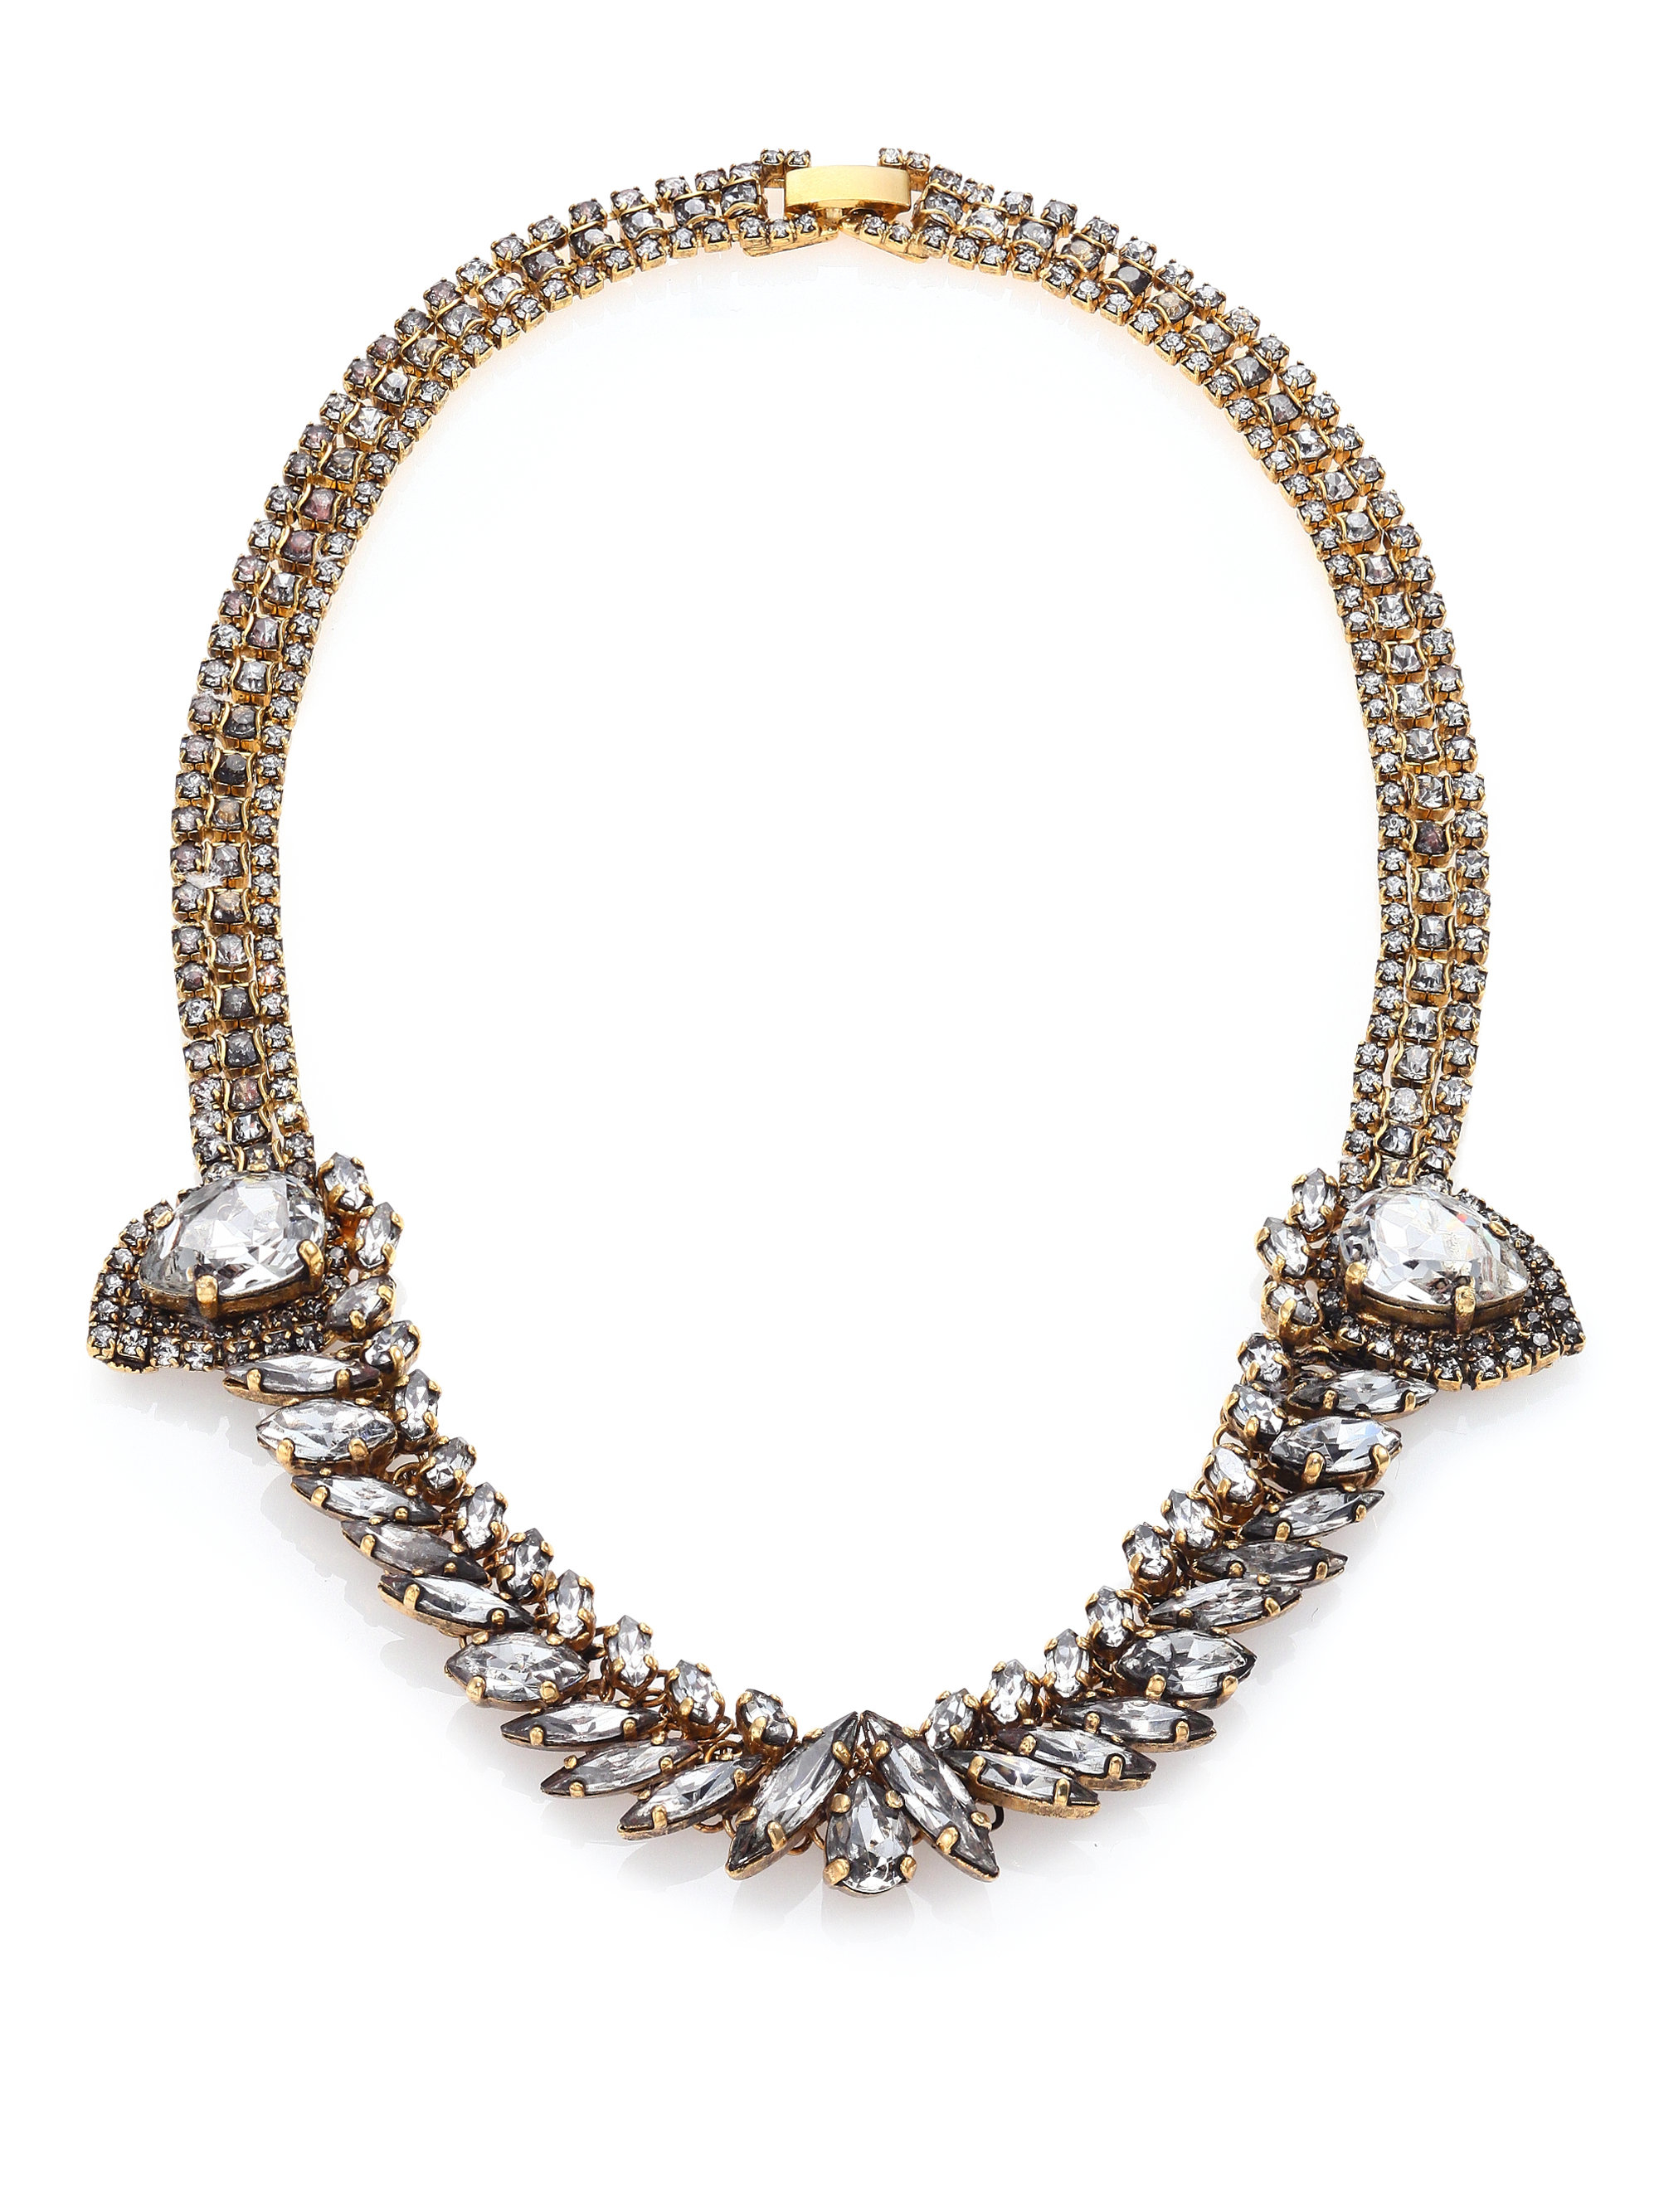 Lyst - Erickson Beamon Young & Innocent Crystal Collar Necklace in Metallic